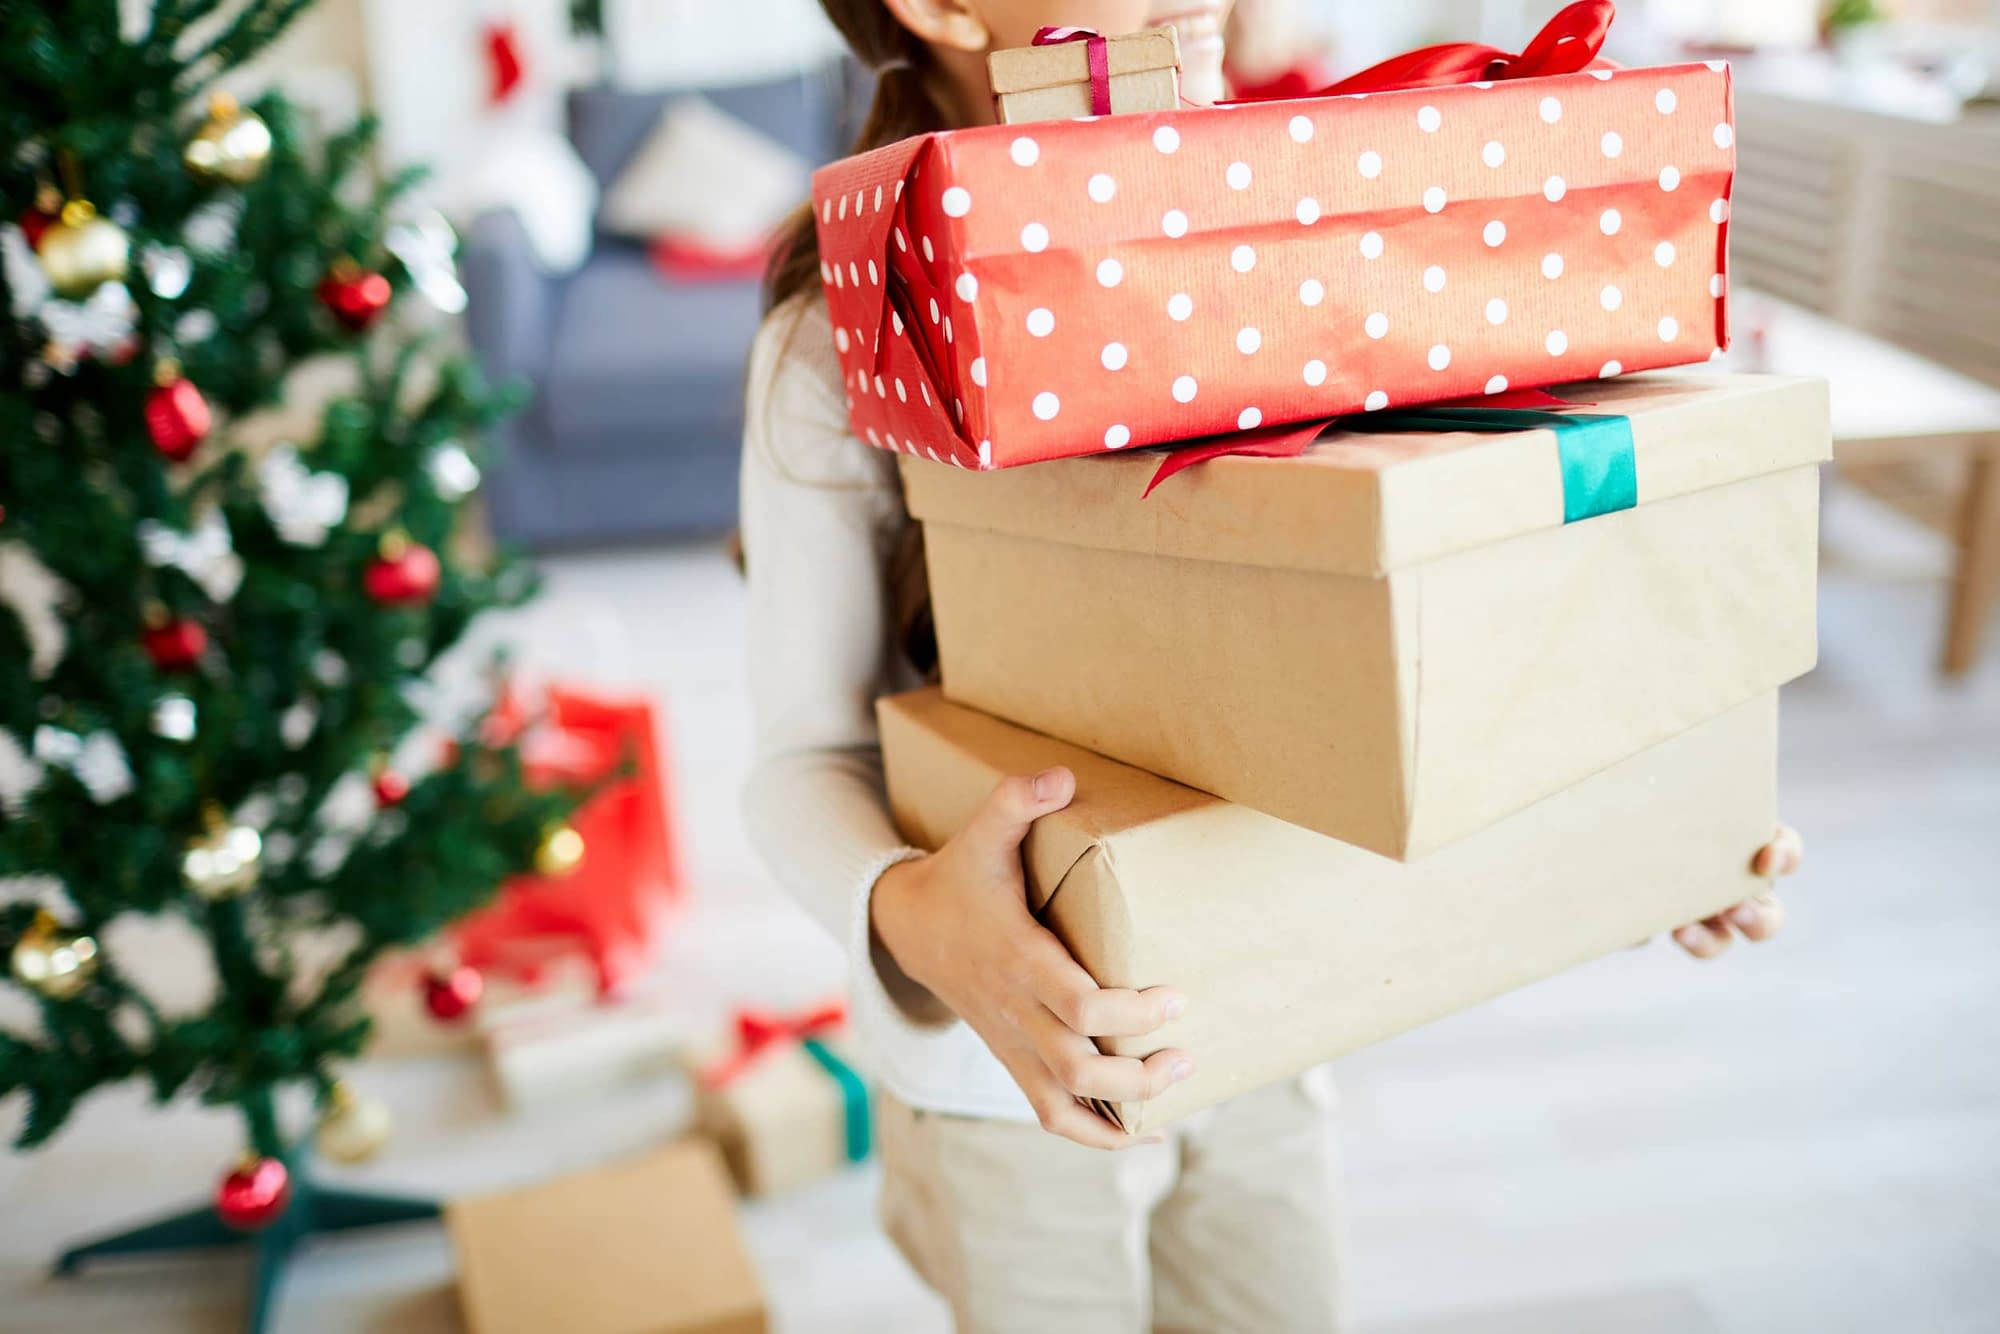 How Many Christmas Presents Should You Buy Your Children?